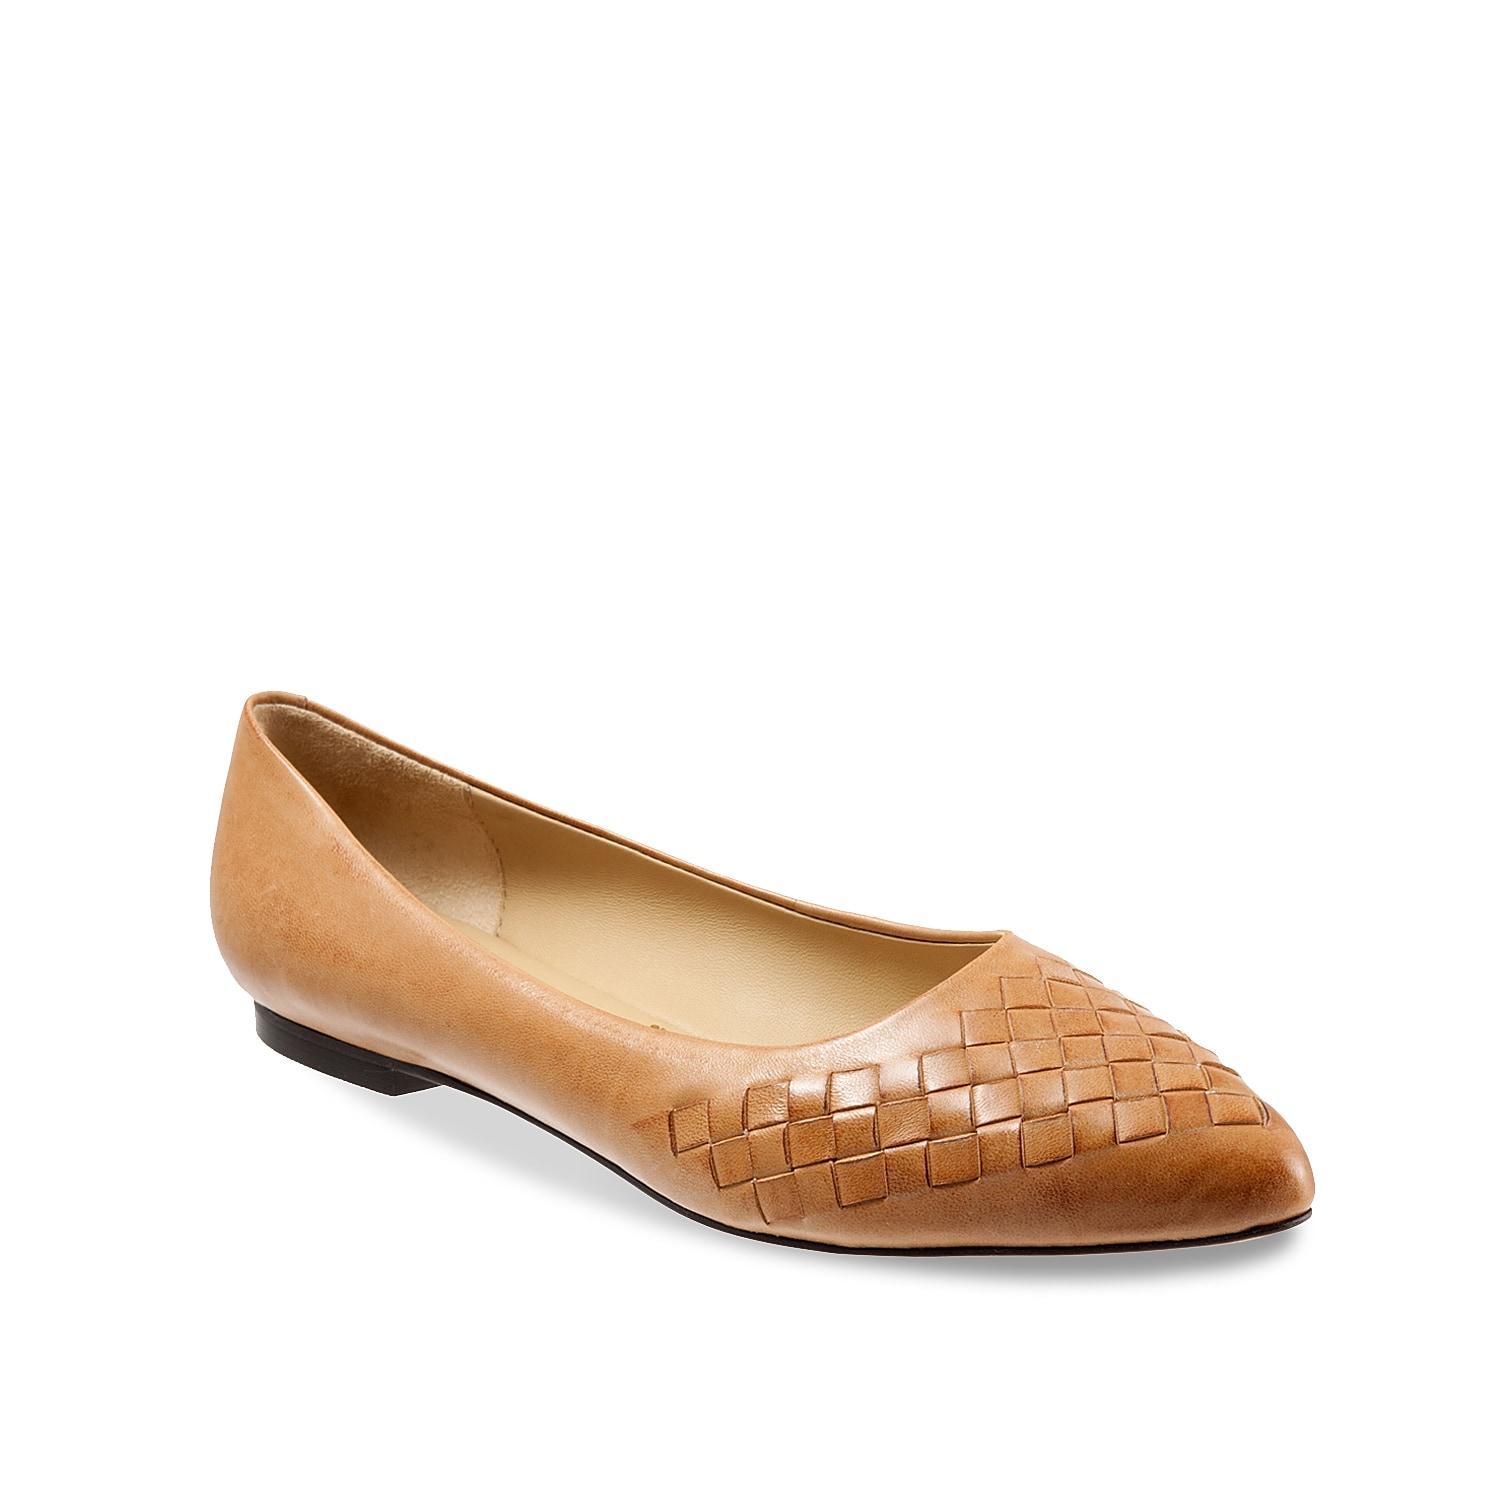 Trotters Estee Woven Flat Product Image